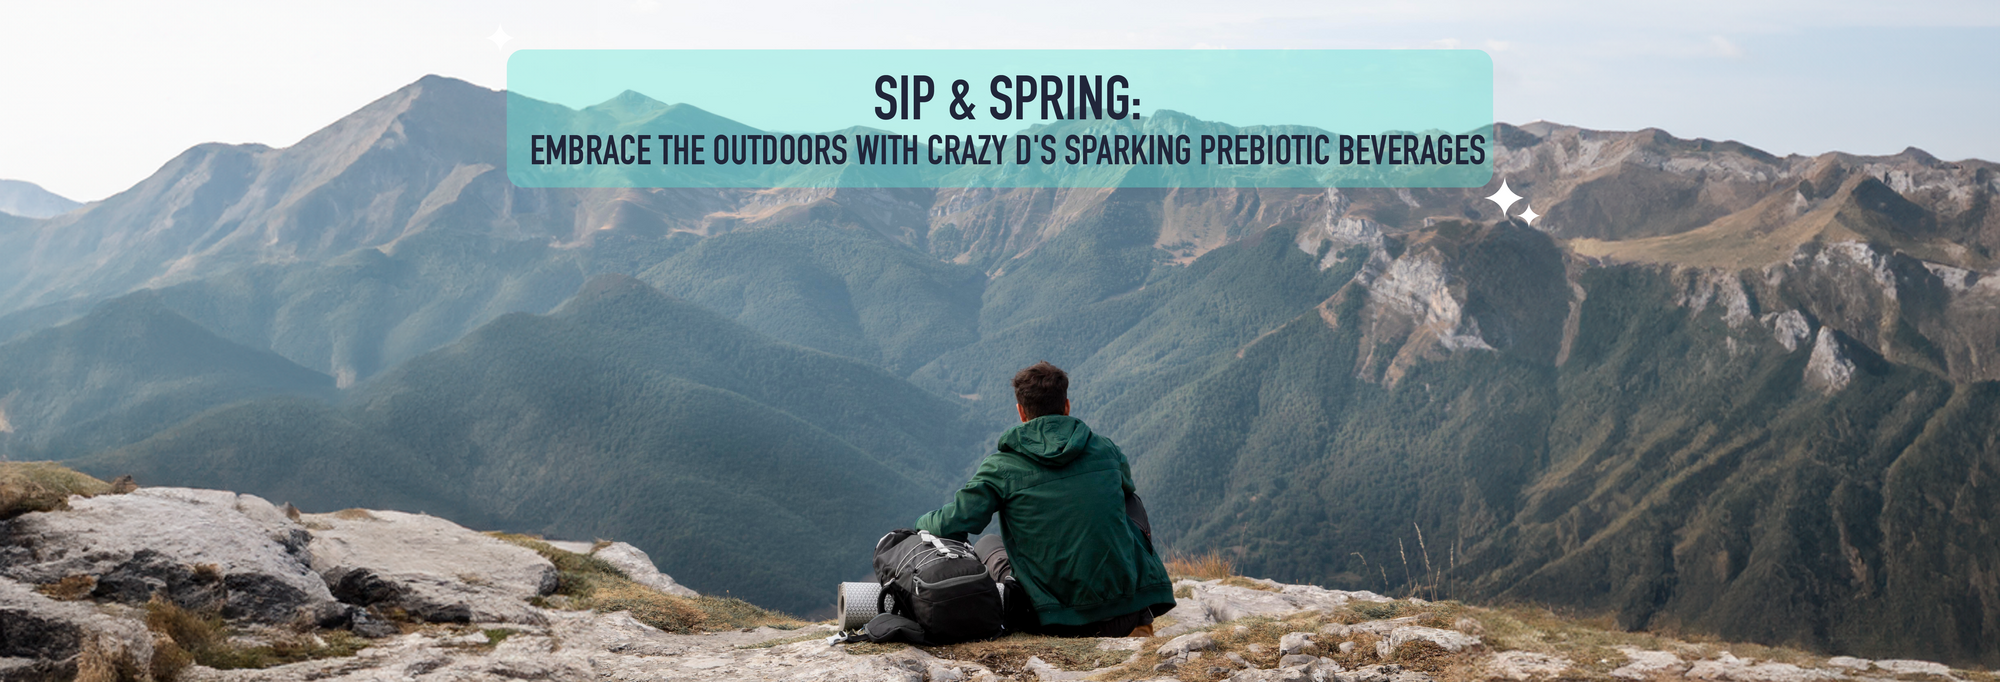 Sip & Spring: Embrace the Outdoors with Crazy D's Sparking Prebiotic Beverage